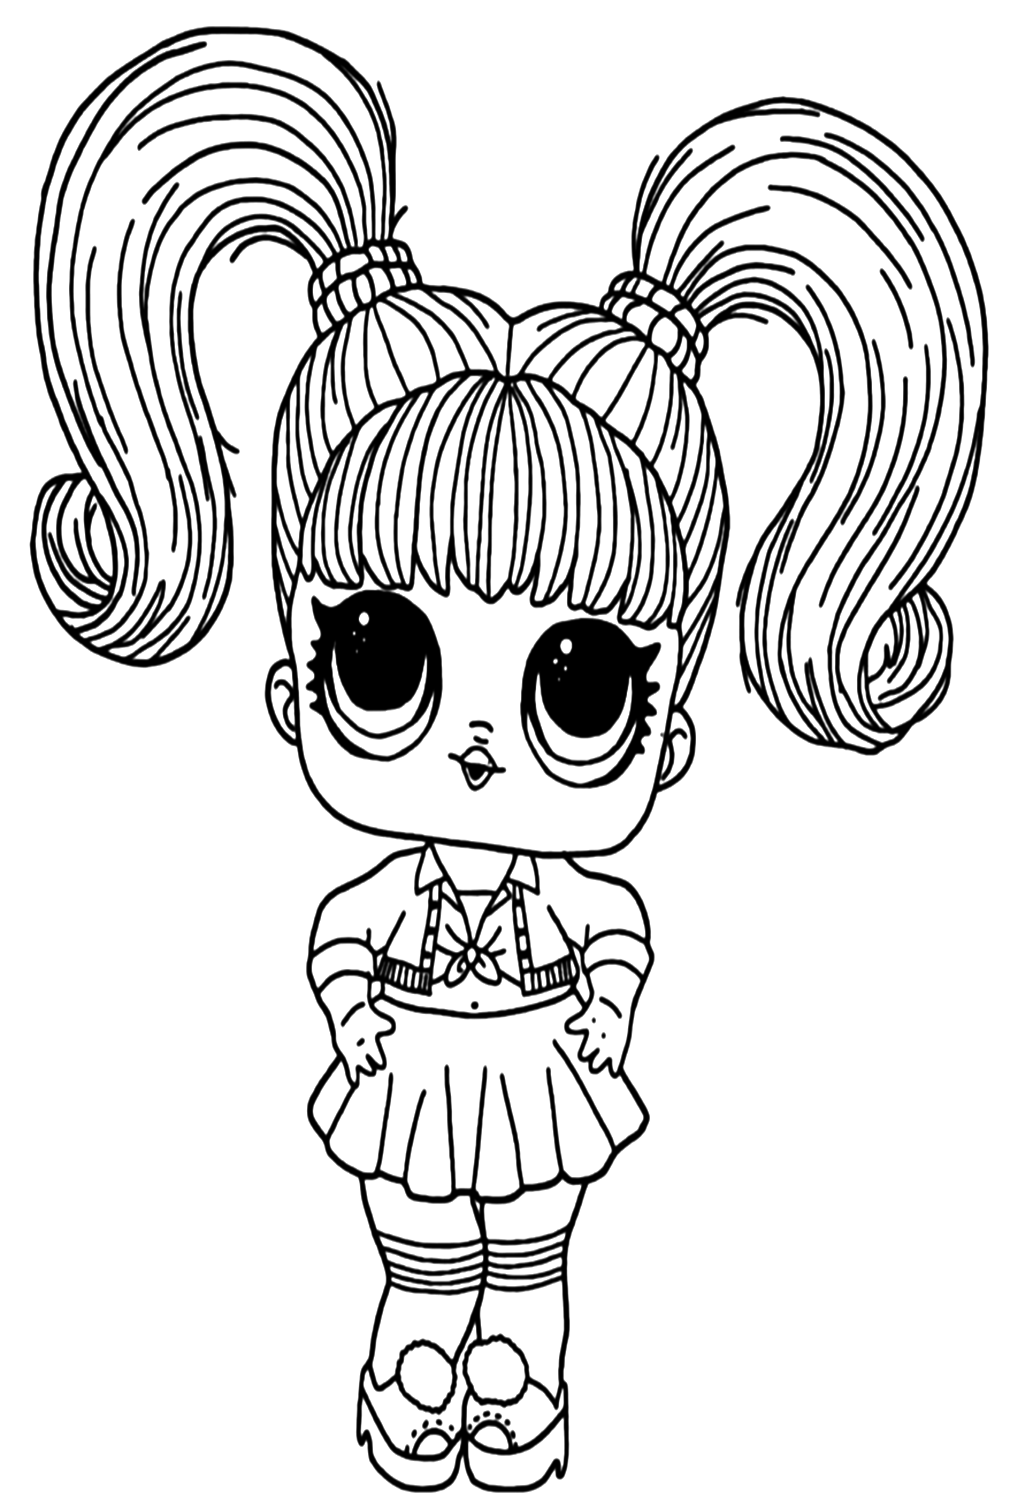 Cute Lol Surprise Doll Coloring Pages - Free Printable Coloring Pages